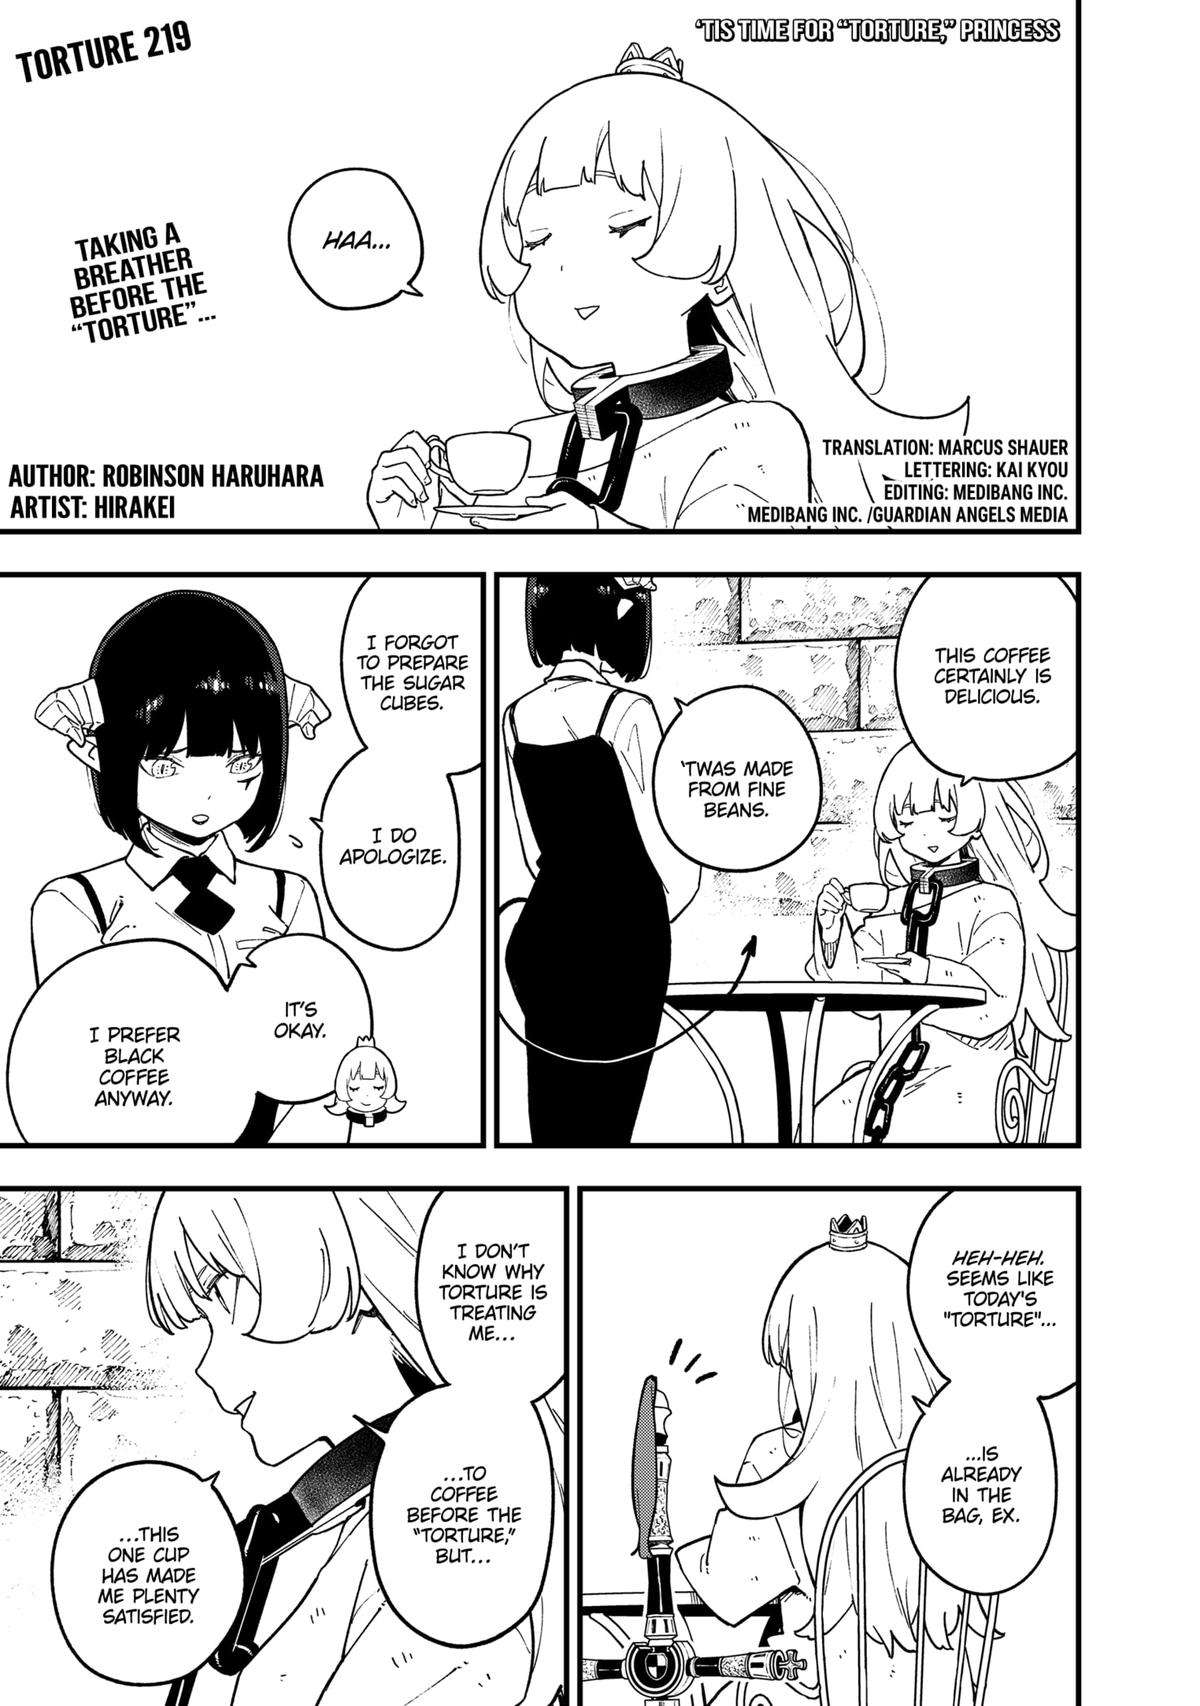 It's Time for "Interrogation", Princess! - chapter 219 - #1